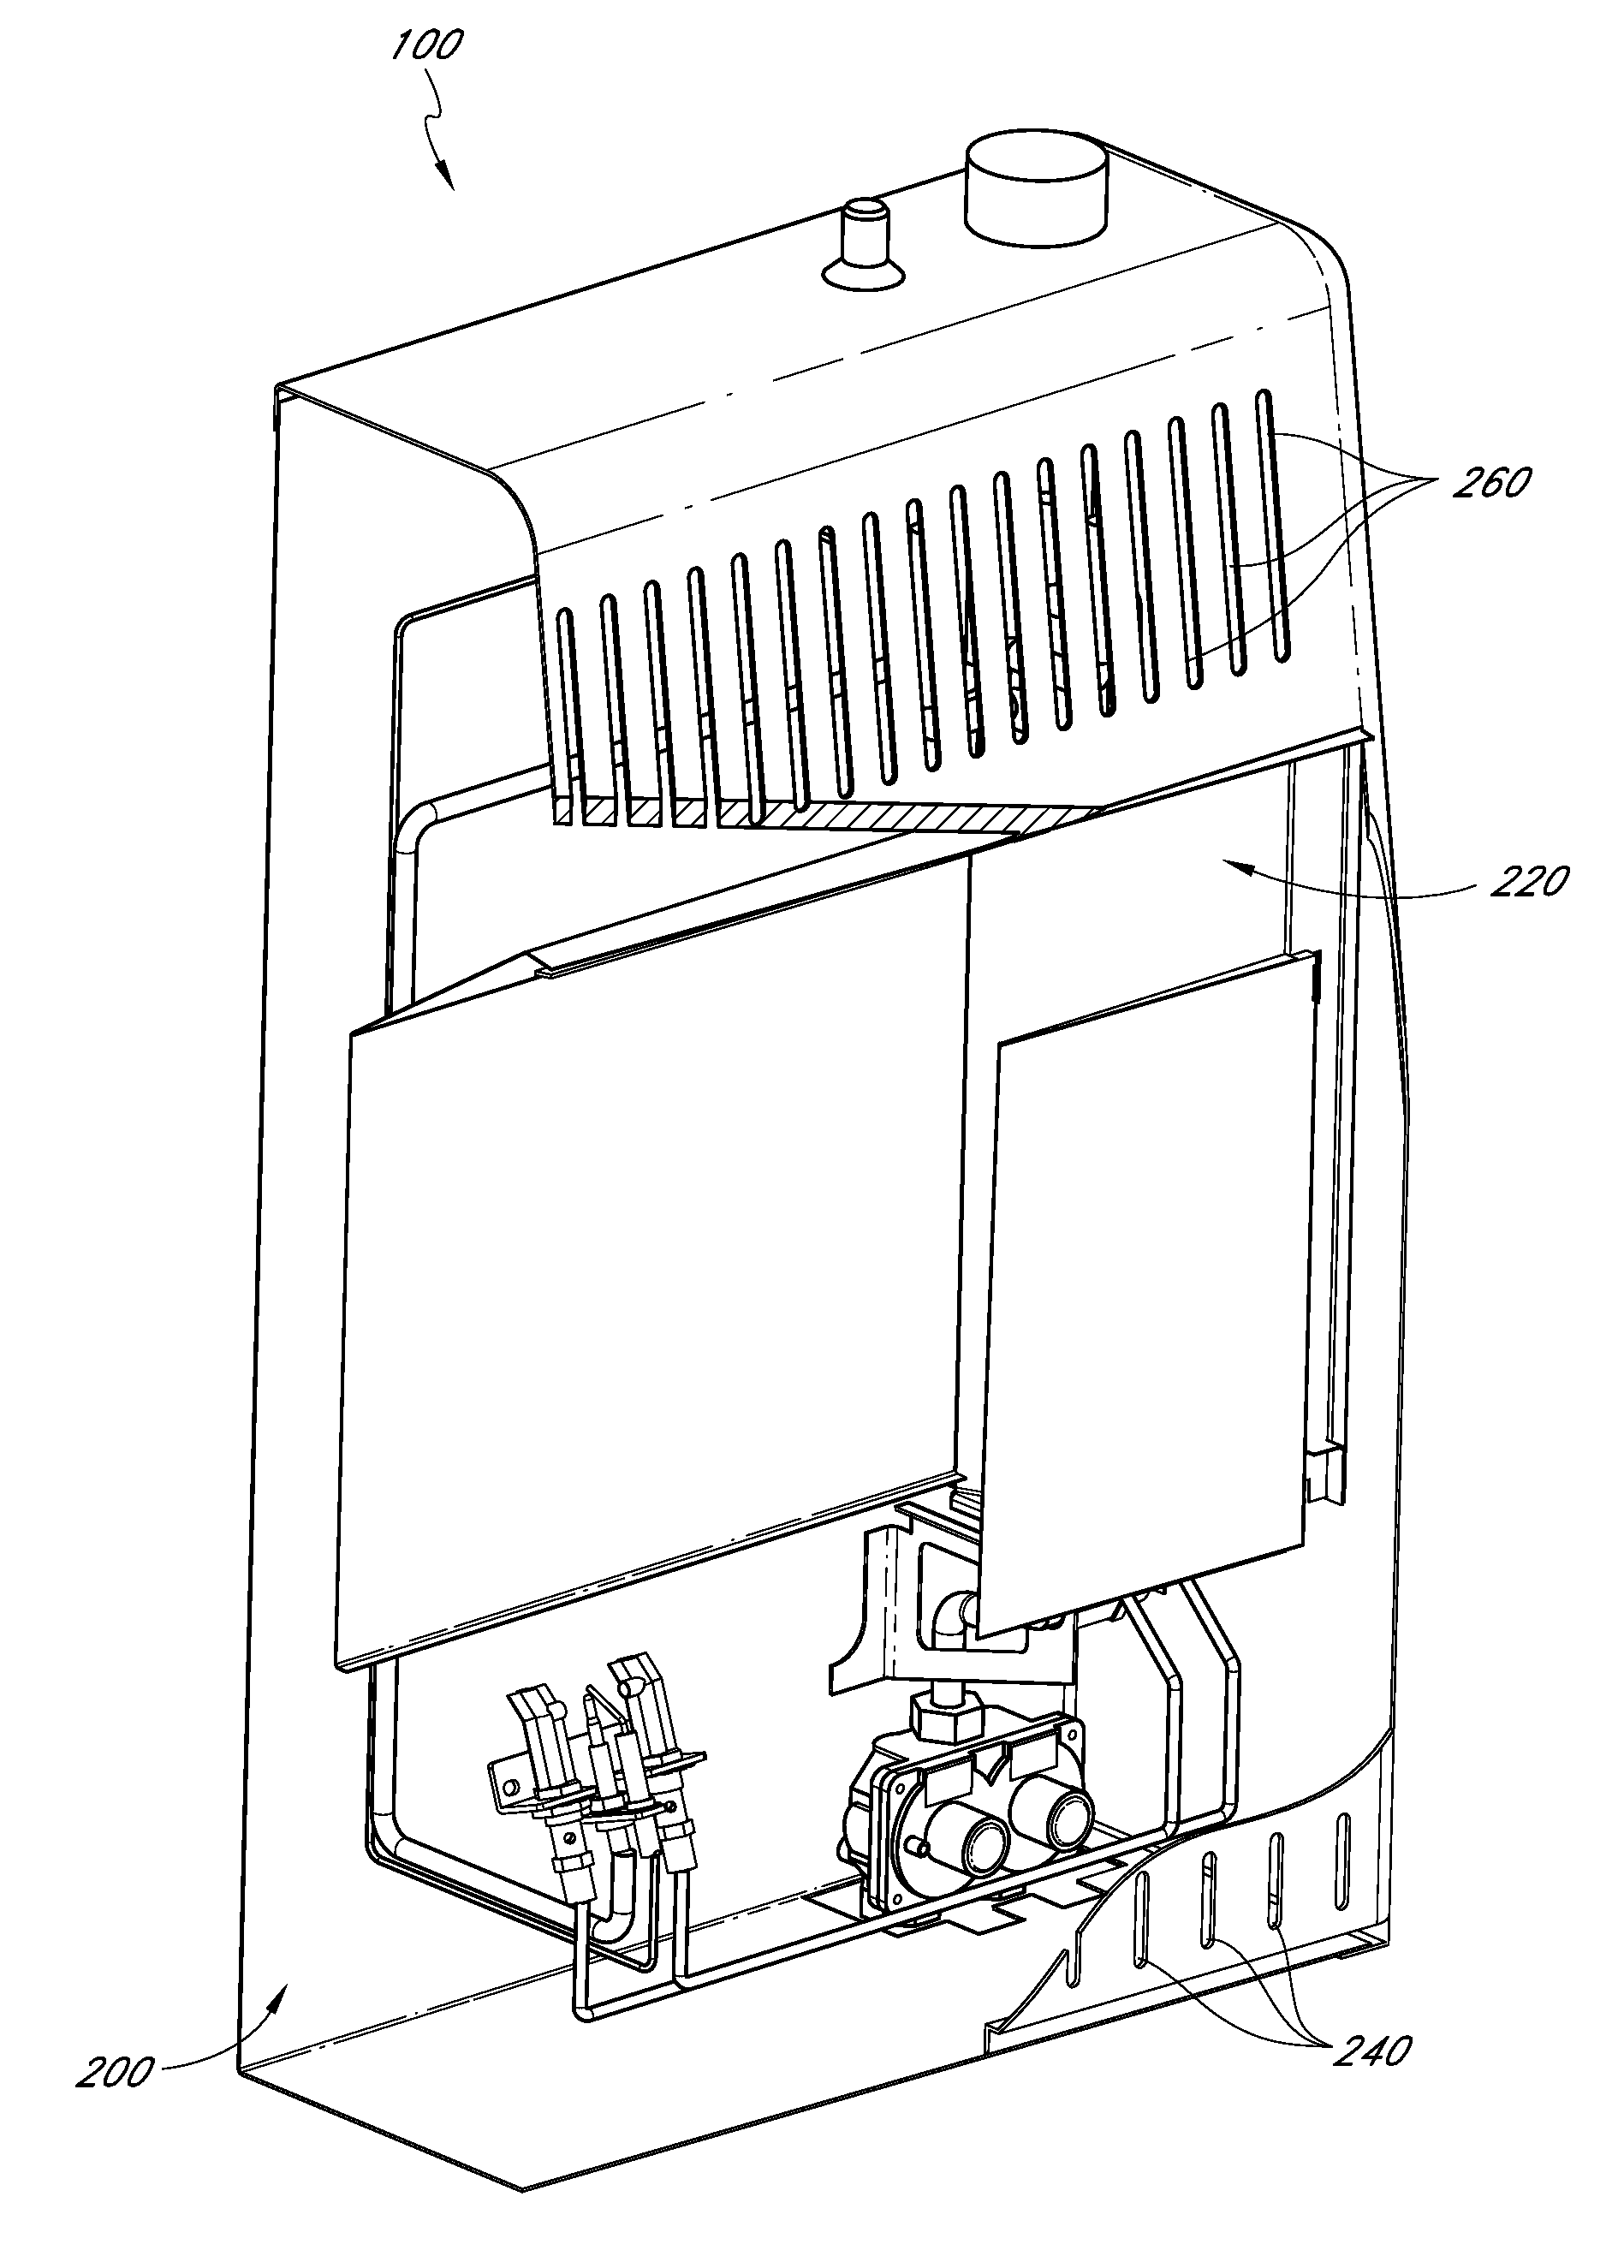 Dual fuel heating source with nozzle